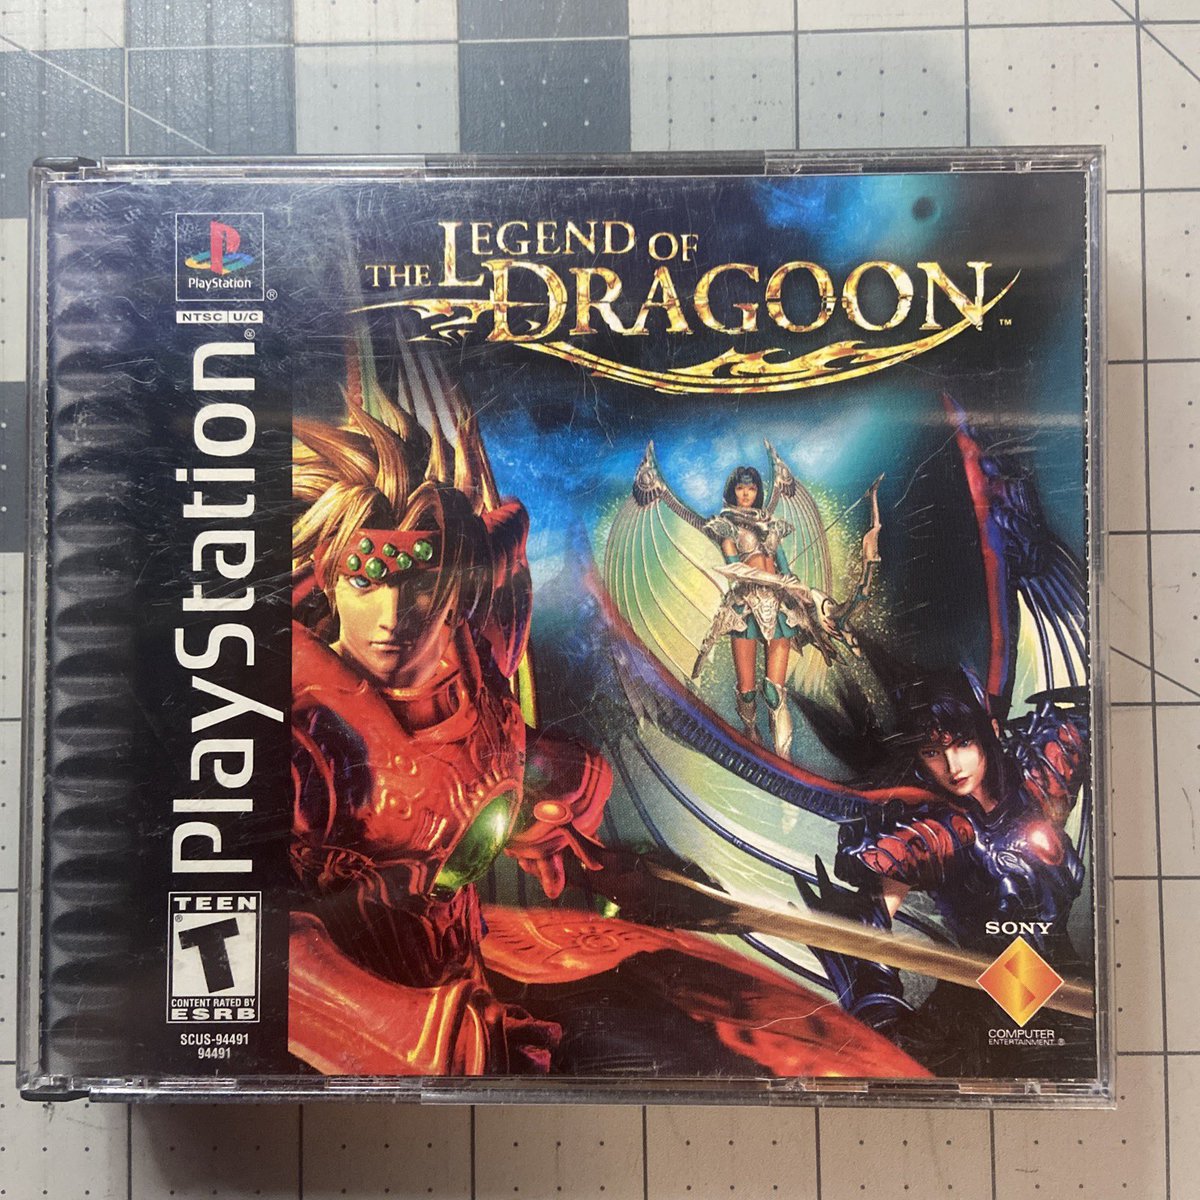 #RESOLD ON #ebay #PlayStation the Legend of Dragoon black label Source #estatesale Bought $3 Sold for $10, $30, $60?